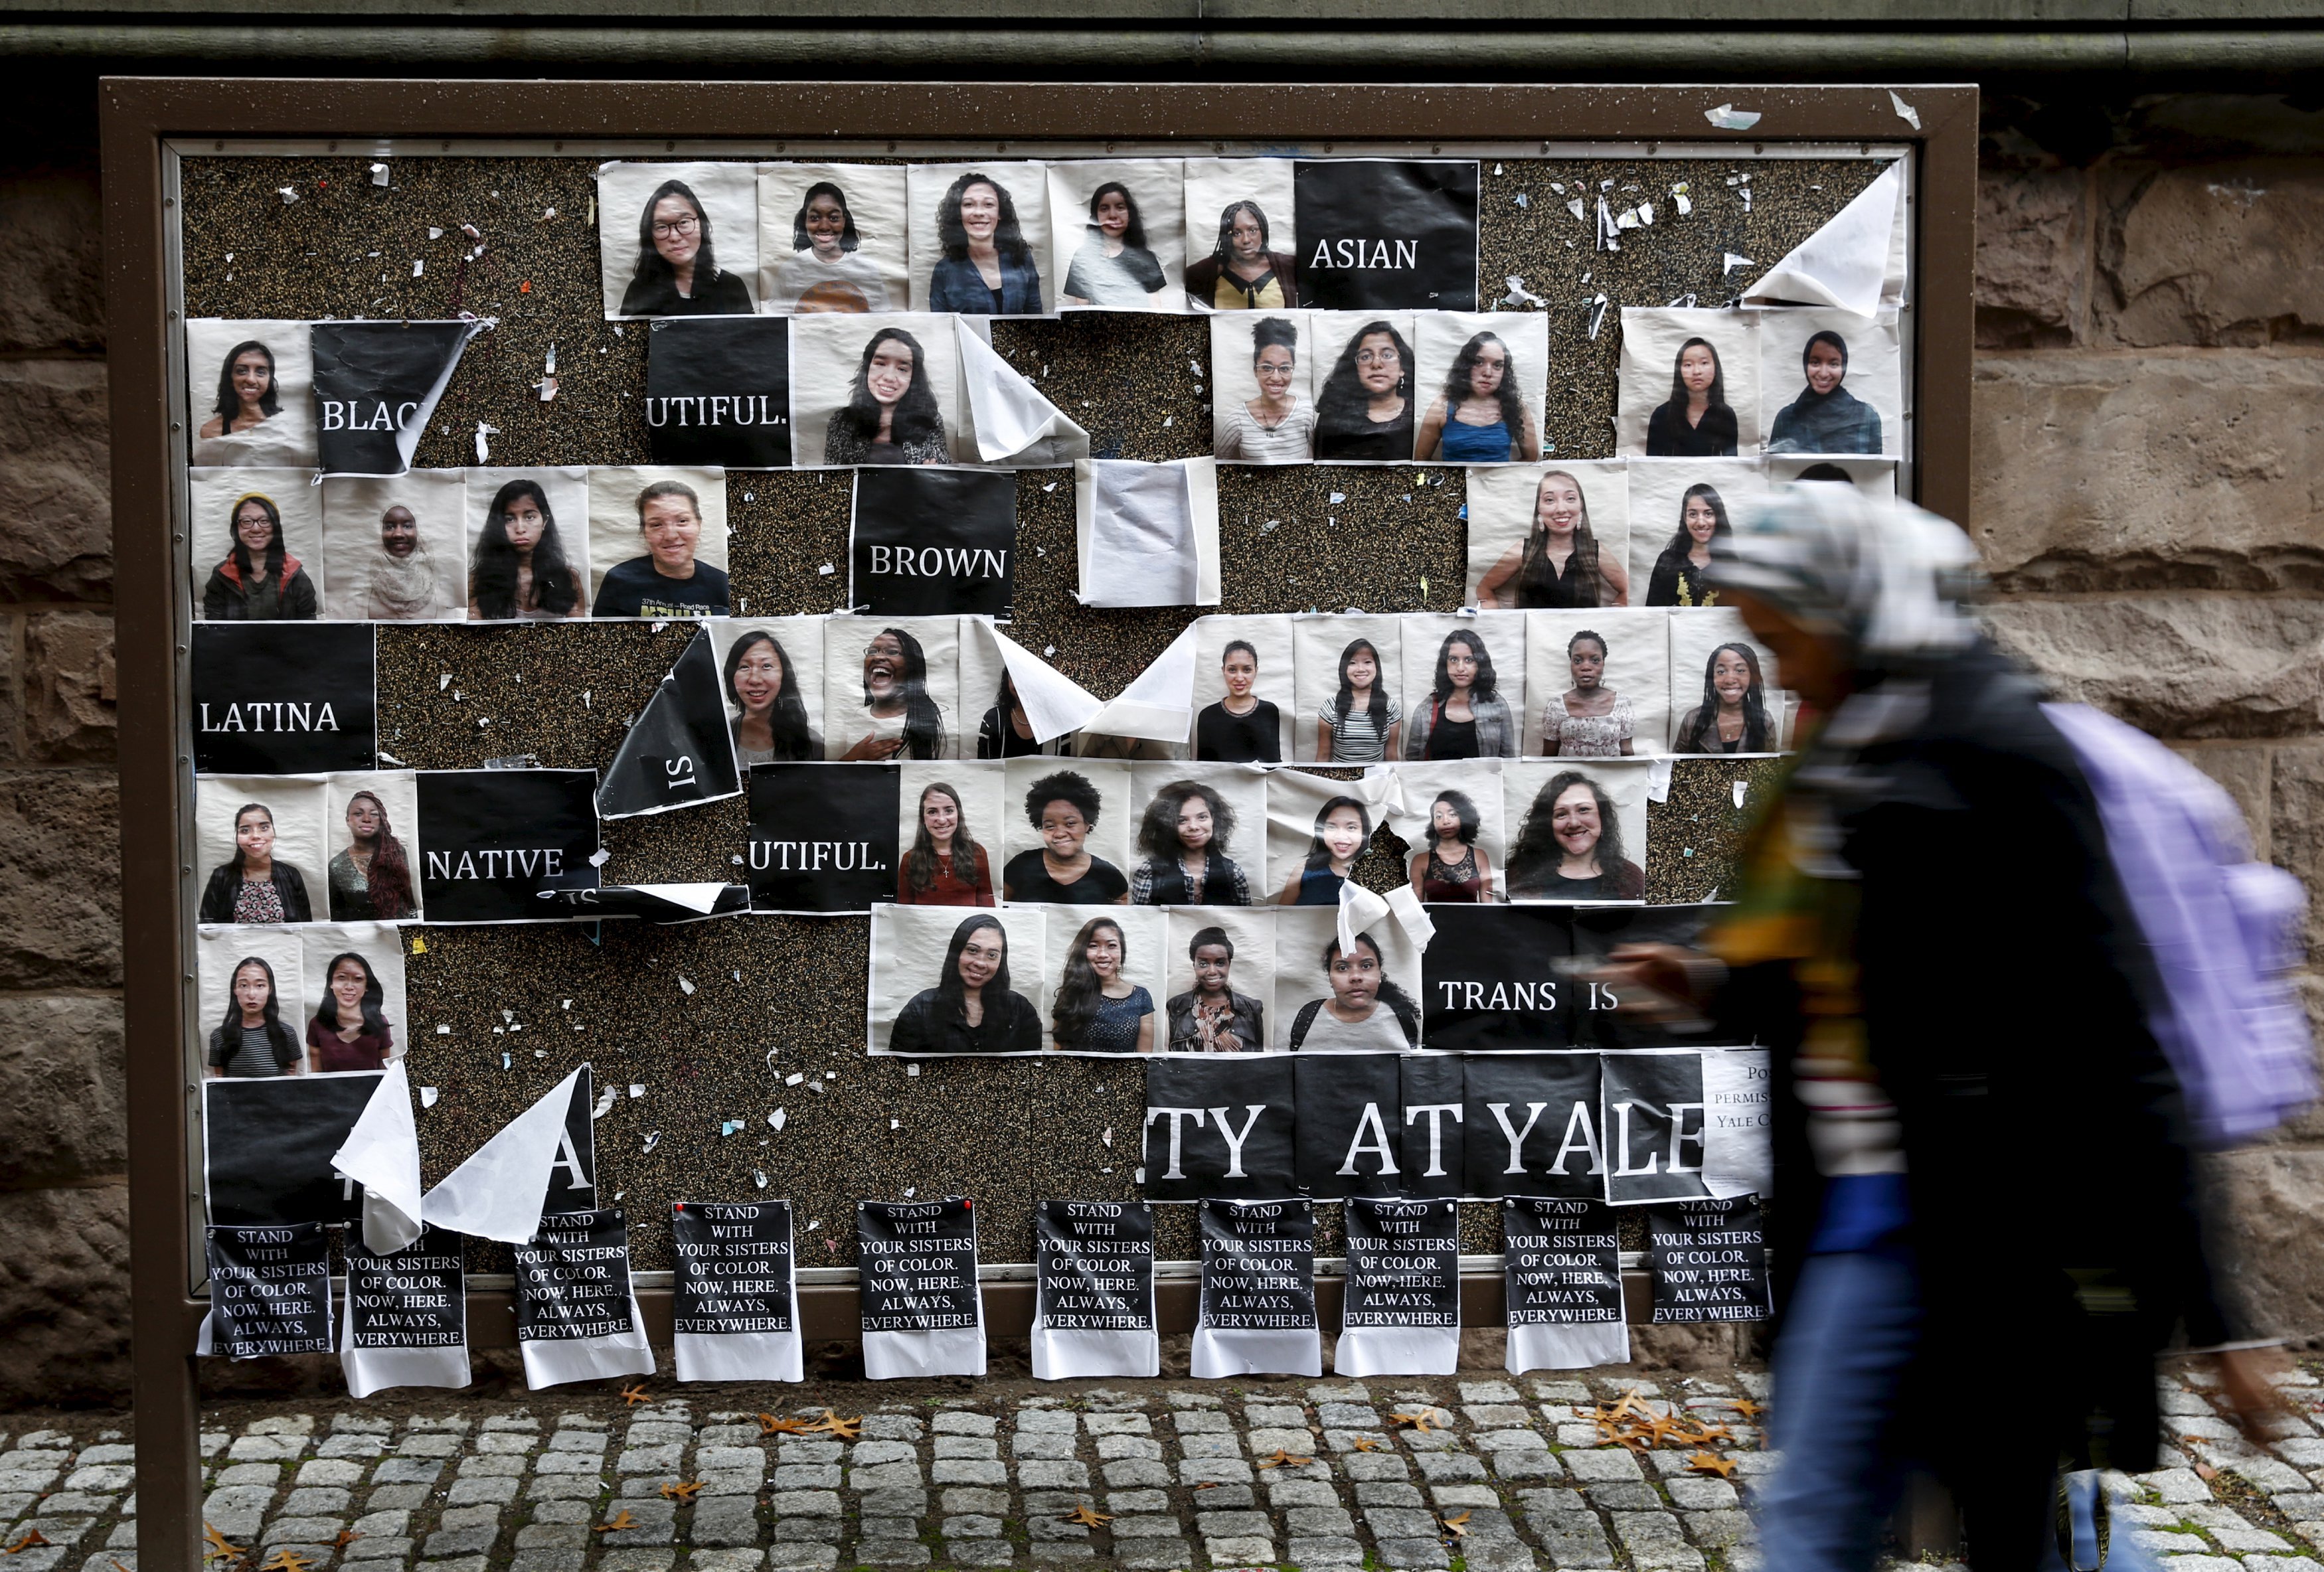 A student walks by a college noticeboard on campus at Yale University in New Haven, Connecticut on Nov. 12, 2015. (Shannon Stapleton—Reuters)